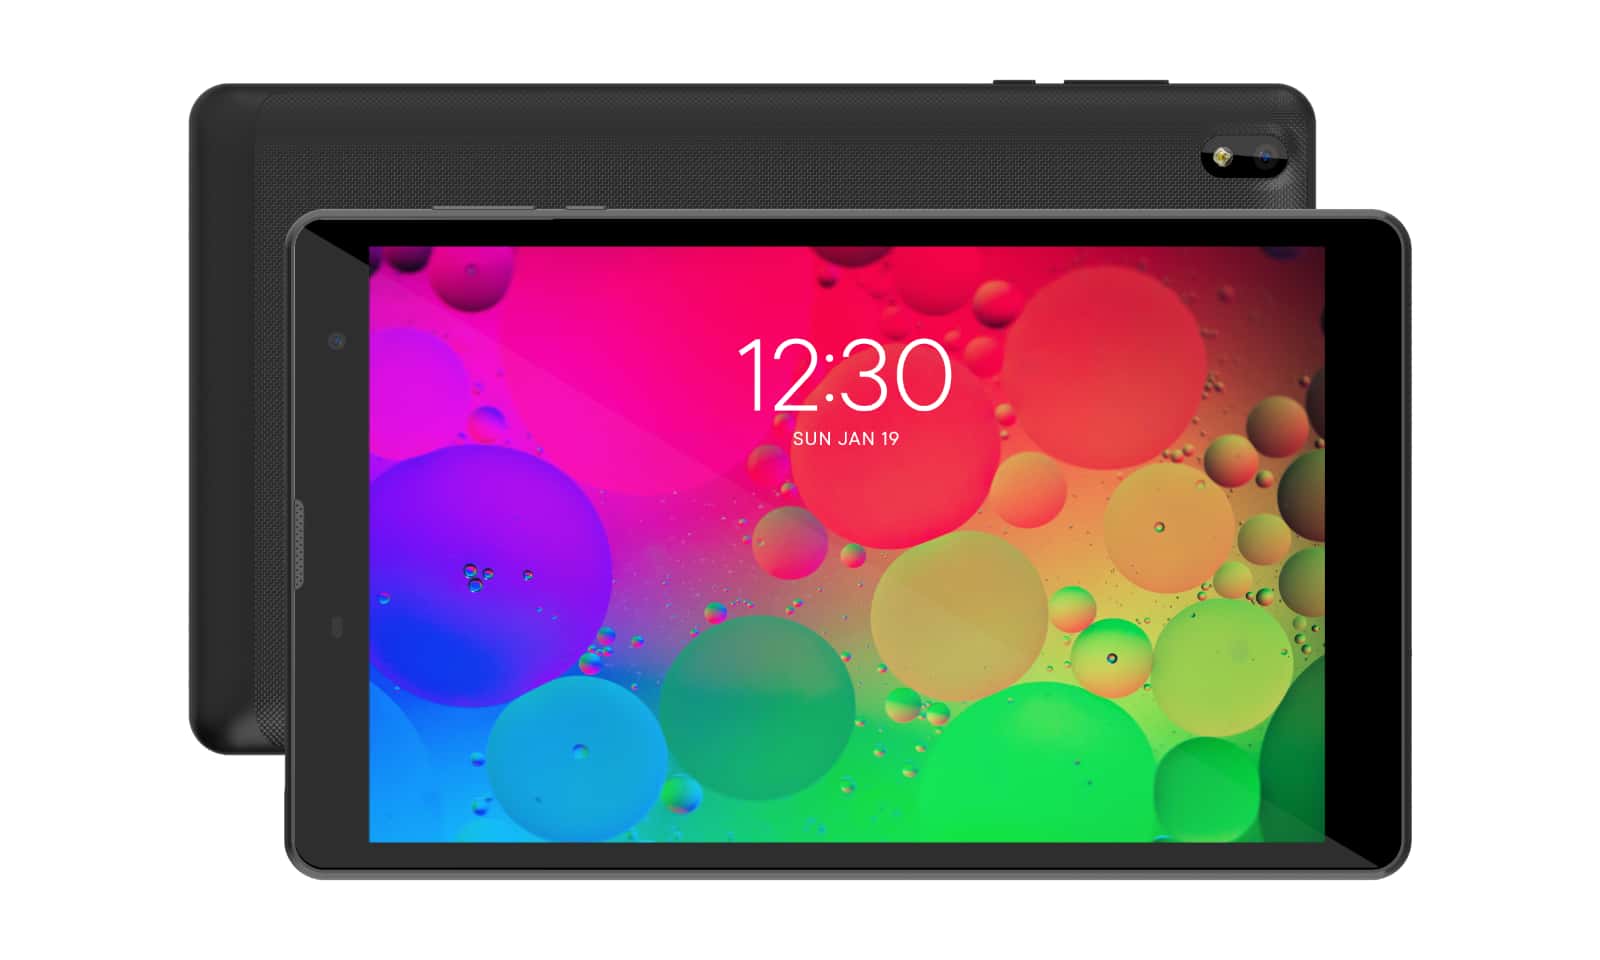 IQU's 8 inch Android tablet.